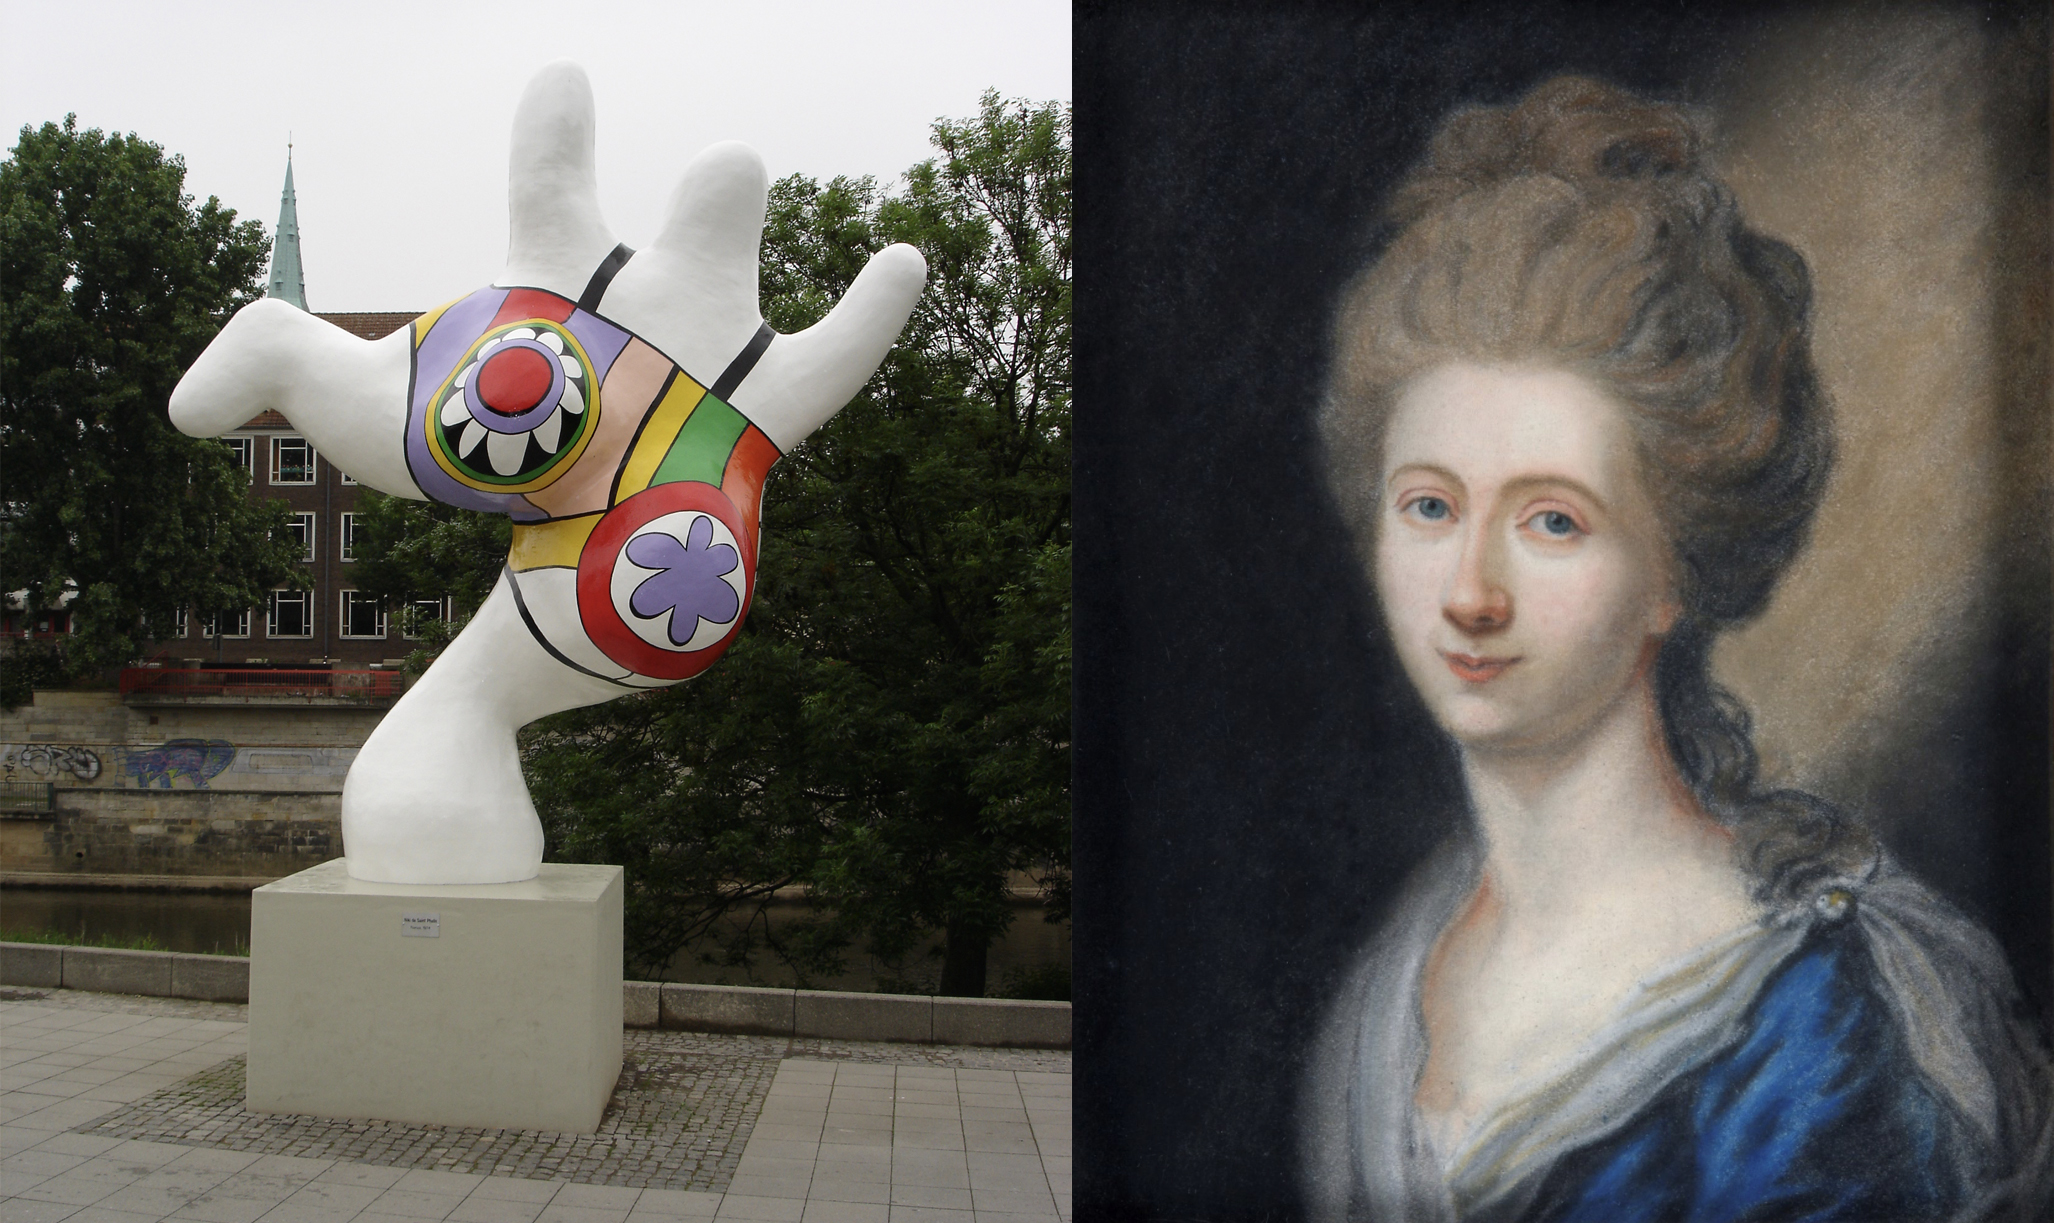 on the left an image of a large dancing white Nana in a bathing suit; on the right a painted portrait of Charlotte Kestner